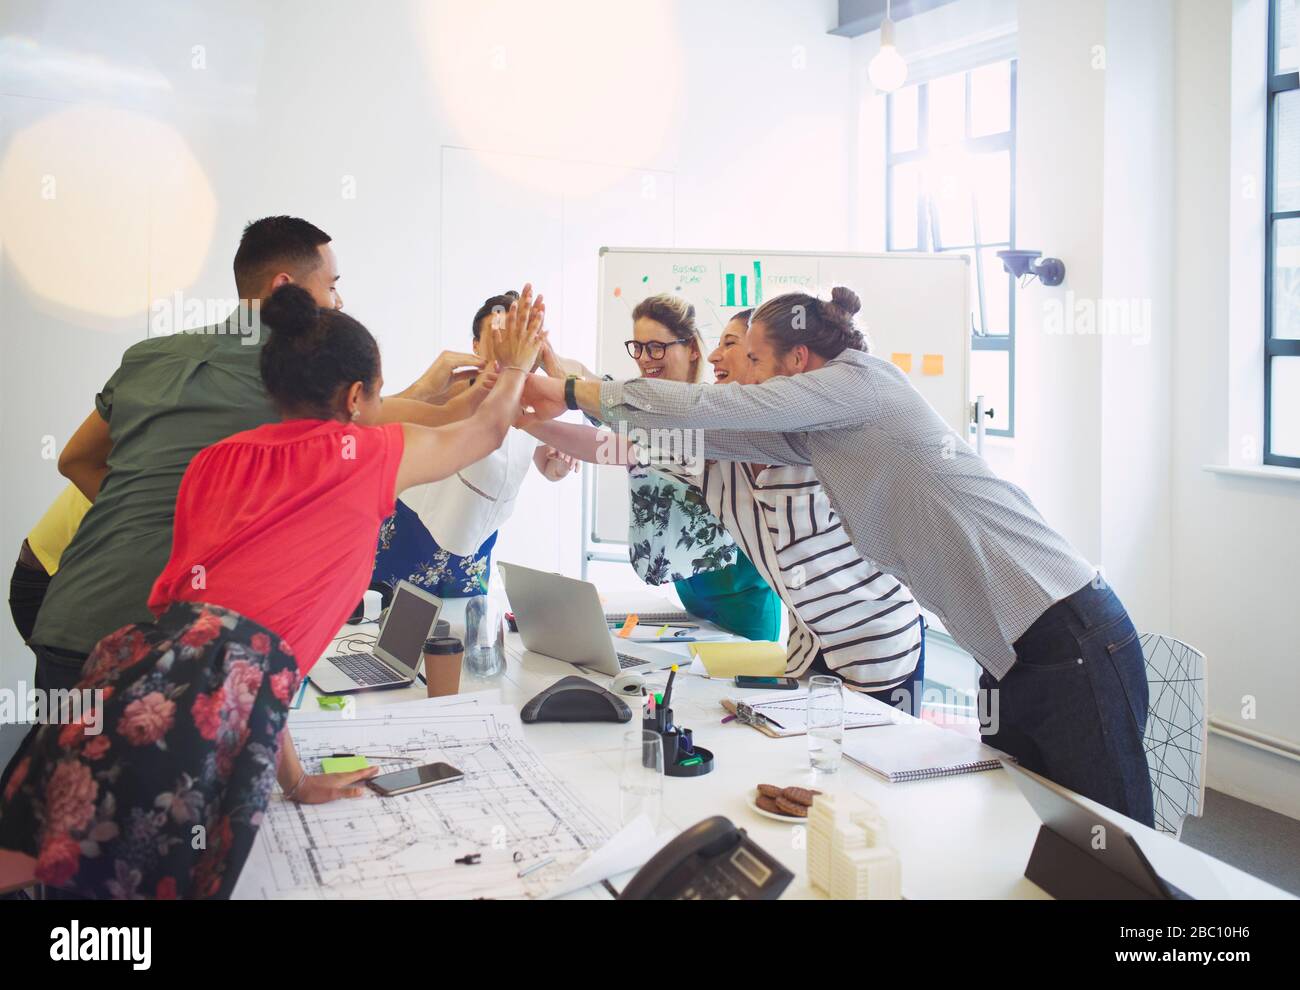 Enthusiastic architects high-fiving in conference room meeting Stock Photo